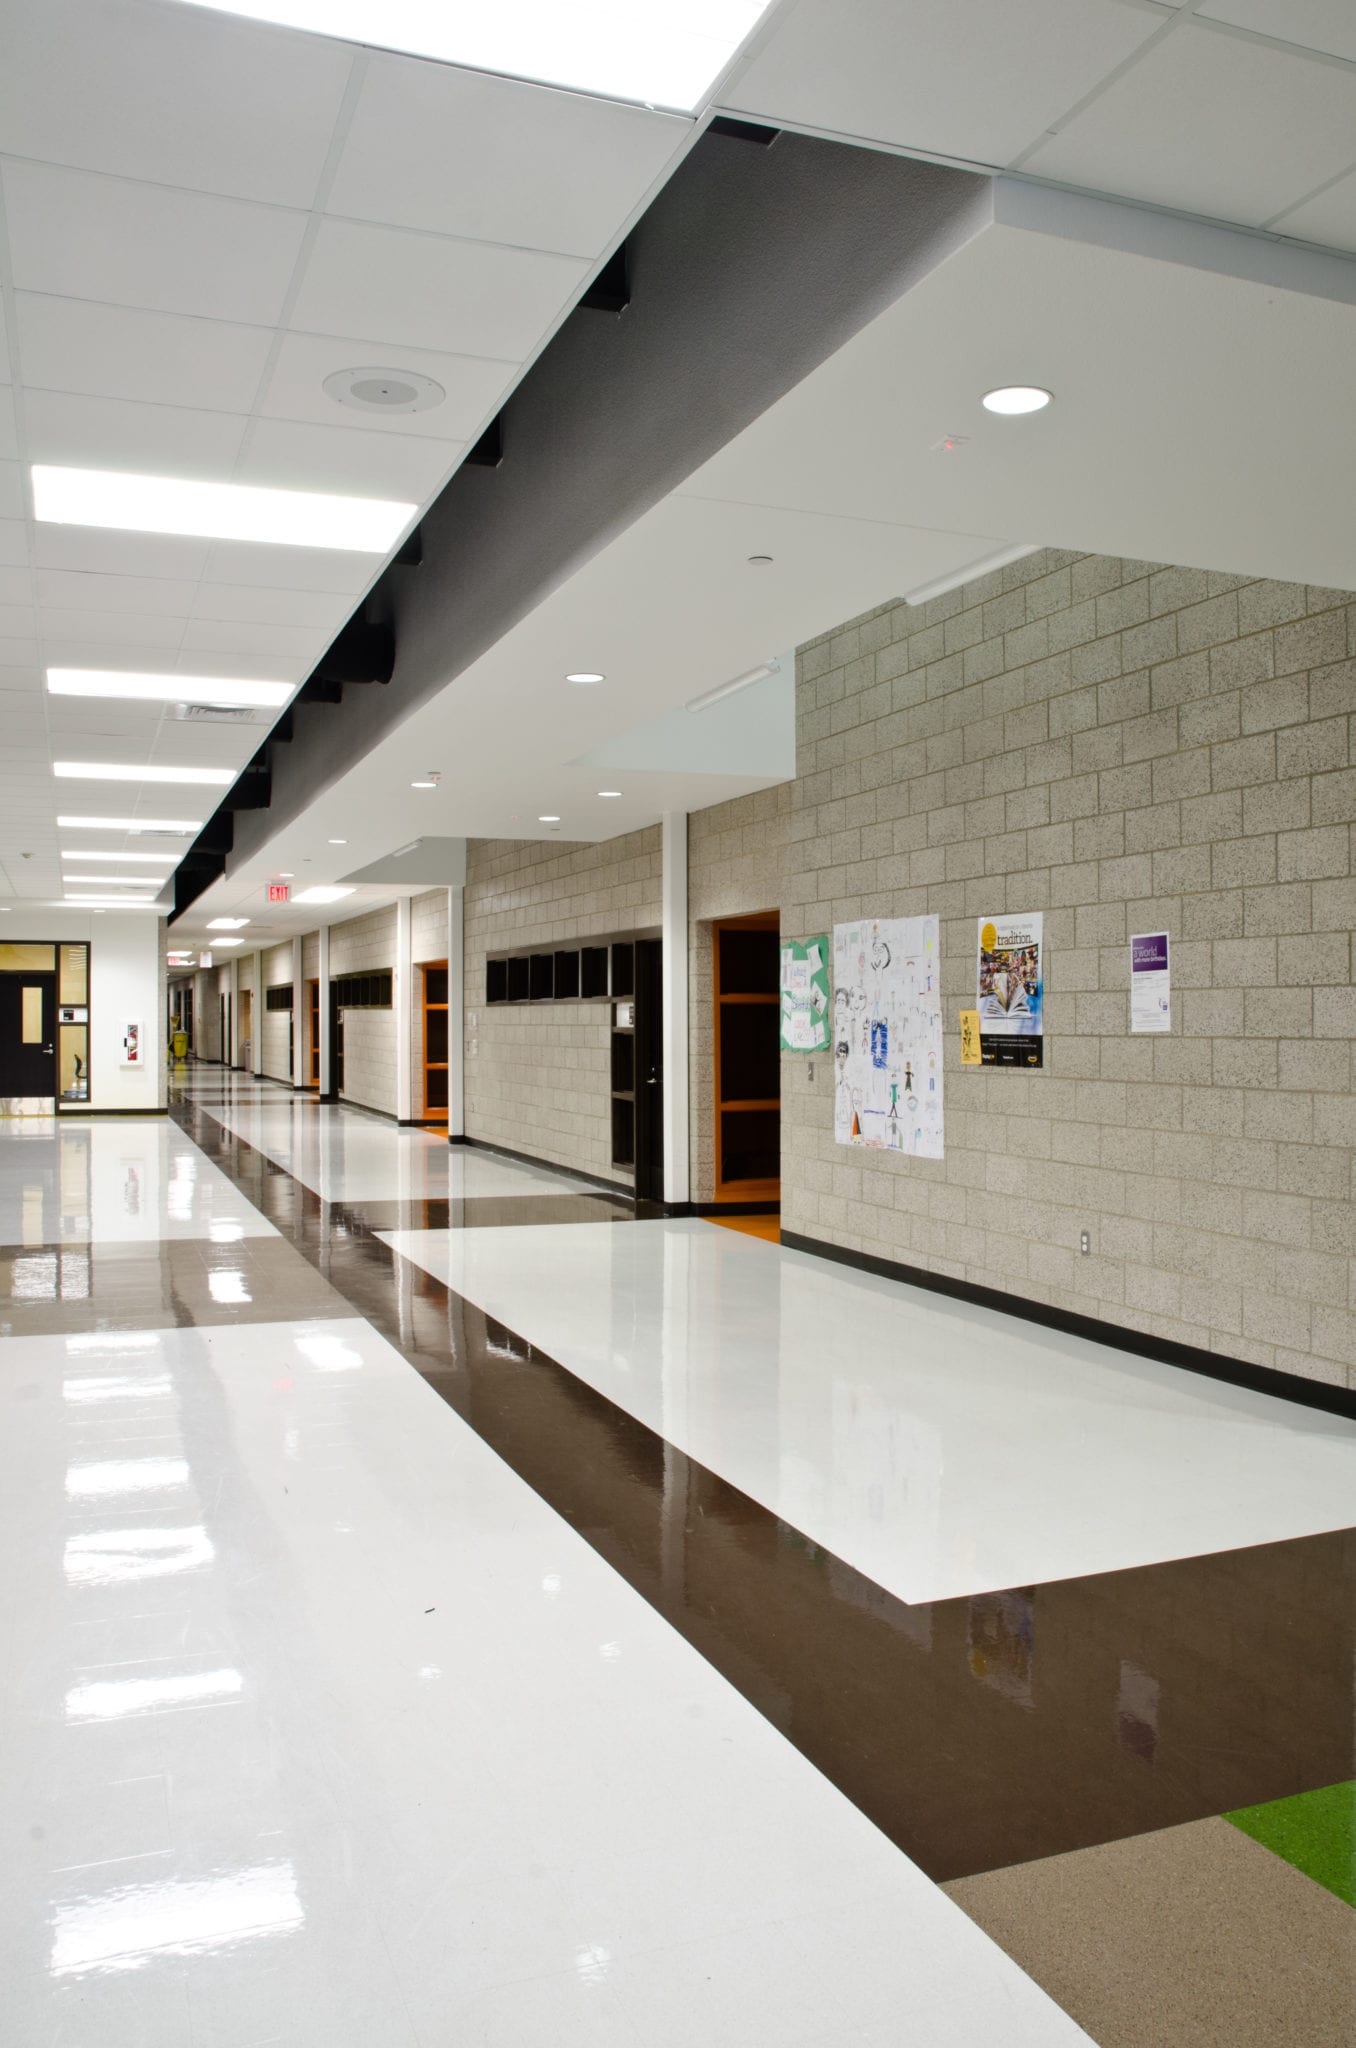 South Belton Middle School - Baird Williams Construction